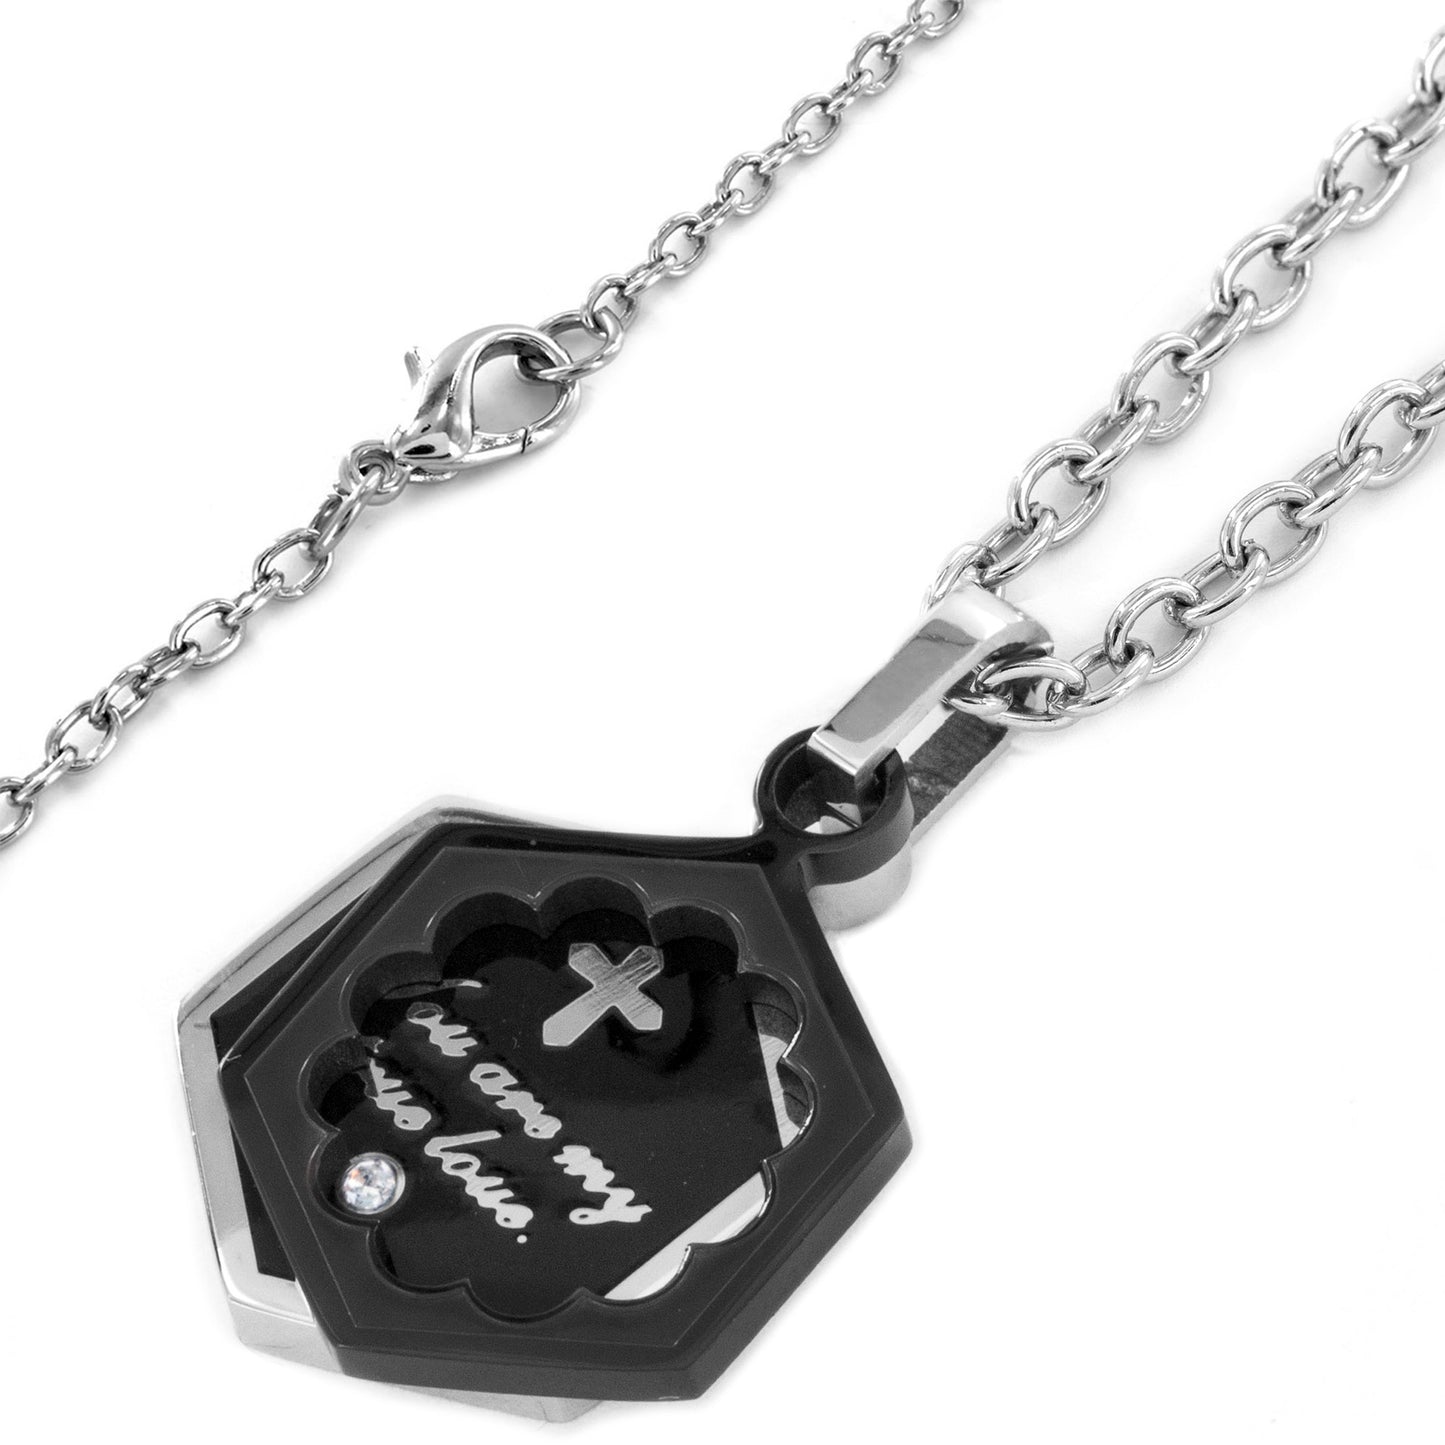 Polished Cubic Zirconia Inspirational Black Plated Pendant Stainless Steel Necklace - 19"